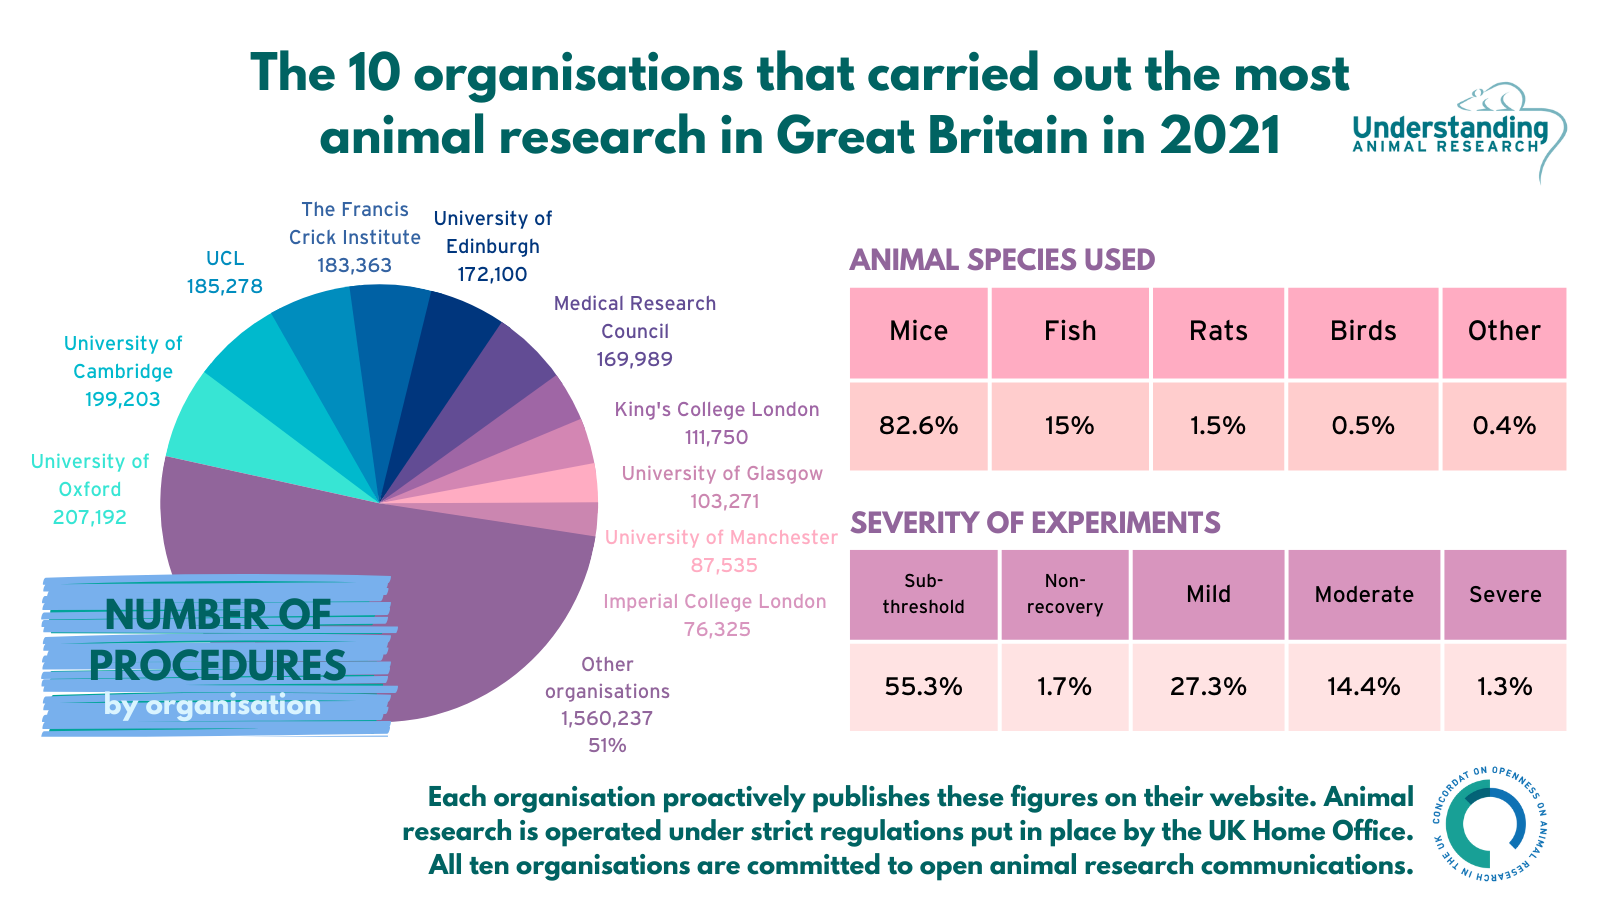 Ten organisations account for half of all animal research in Great Britain in 2021